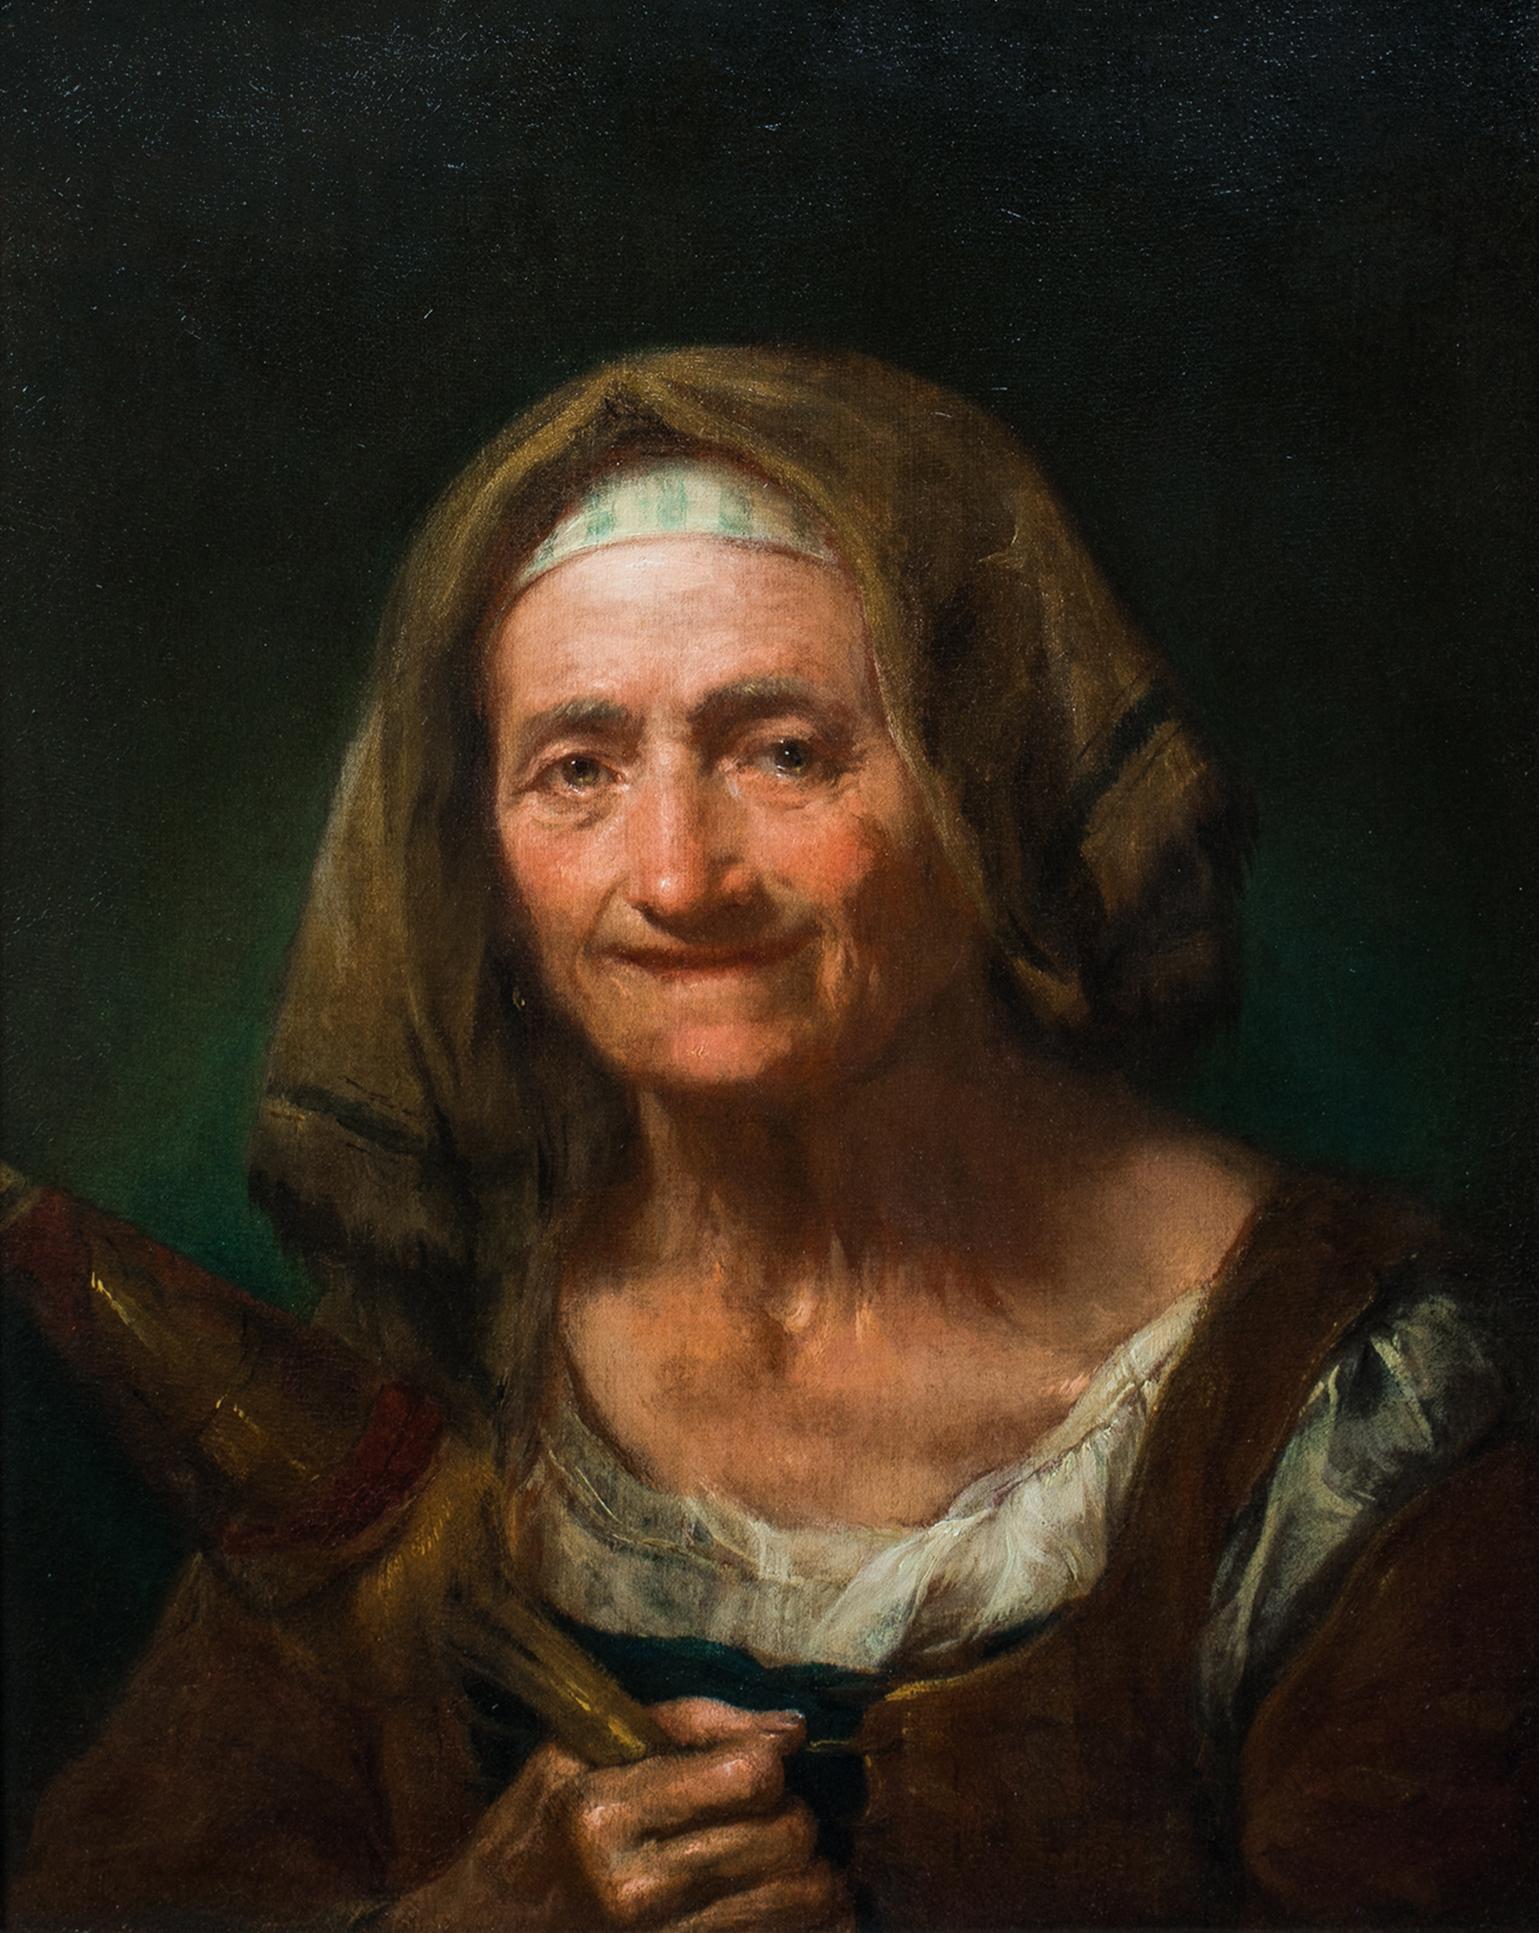 Portrait Of An Elderly Woman, 18th Century

by Giuseppe Nogari (1699-1763) sales to $250,000

Large 18th century Italian Old Master portrait of an elderly woman, oil on canvas. Original unrestored condition and excellent example of the famous Rococo